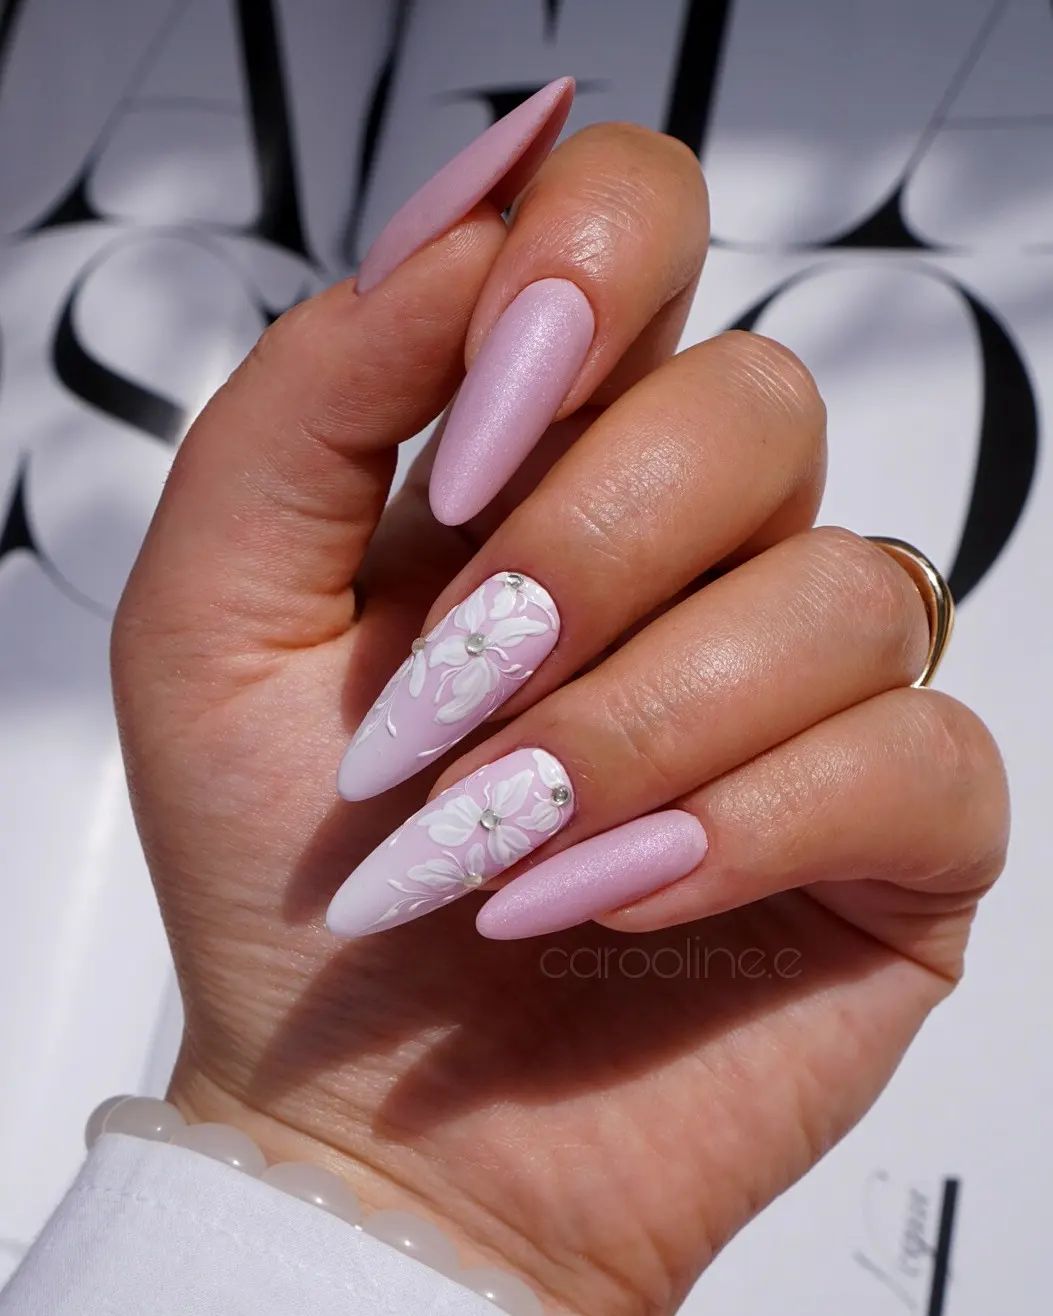 Long Almond Pink Nails with White Floral Design